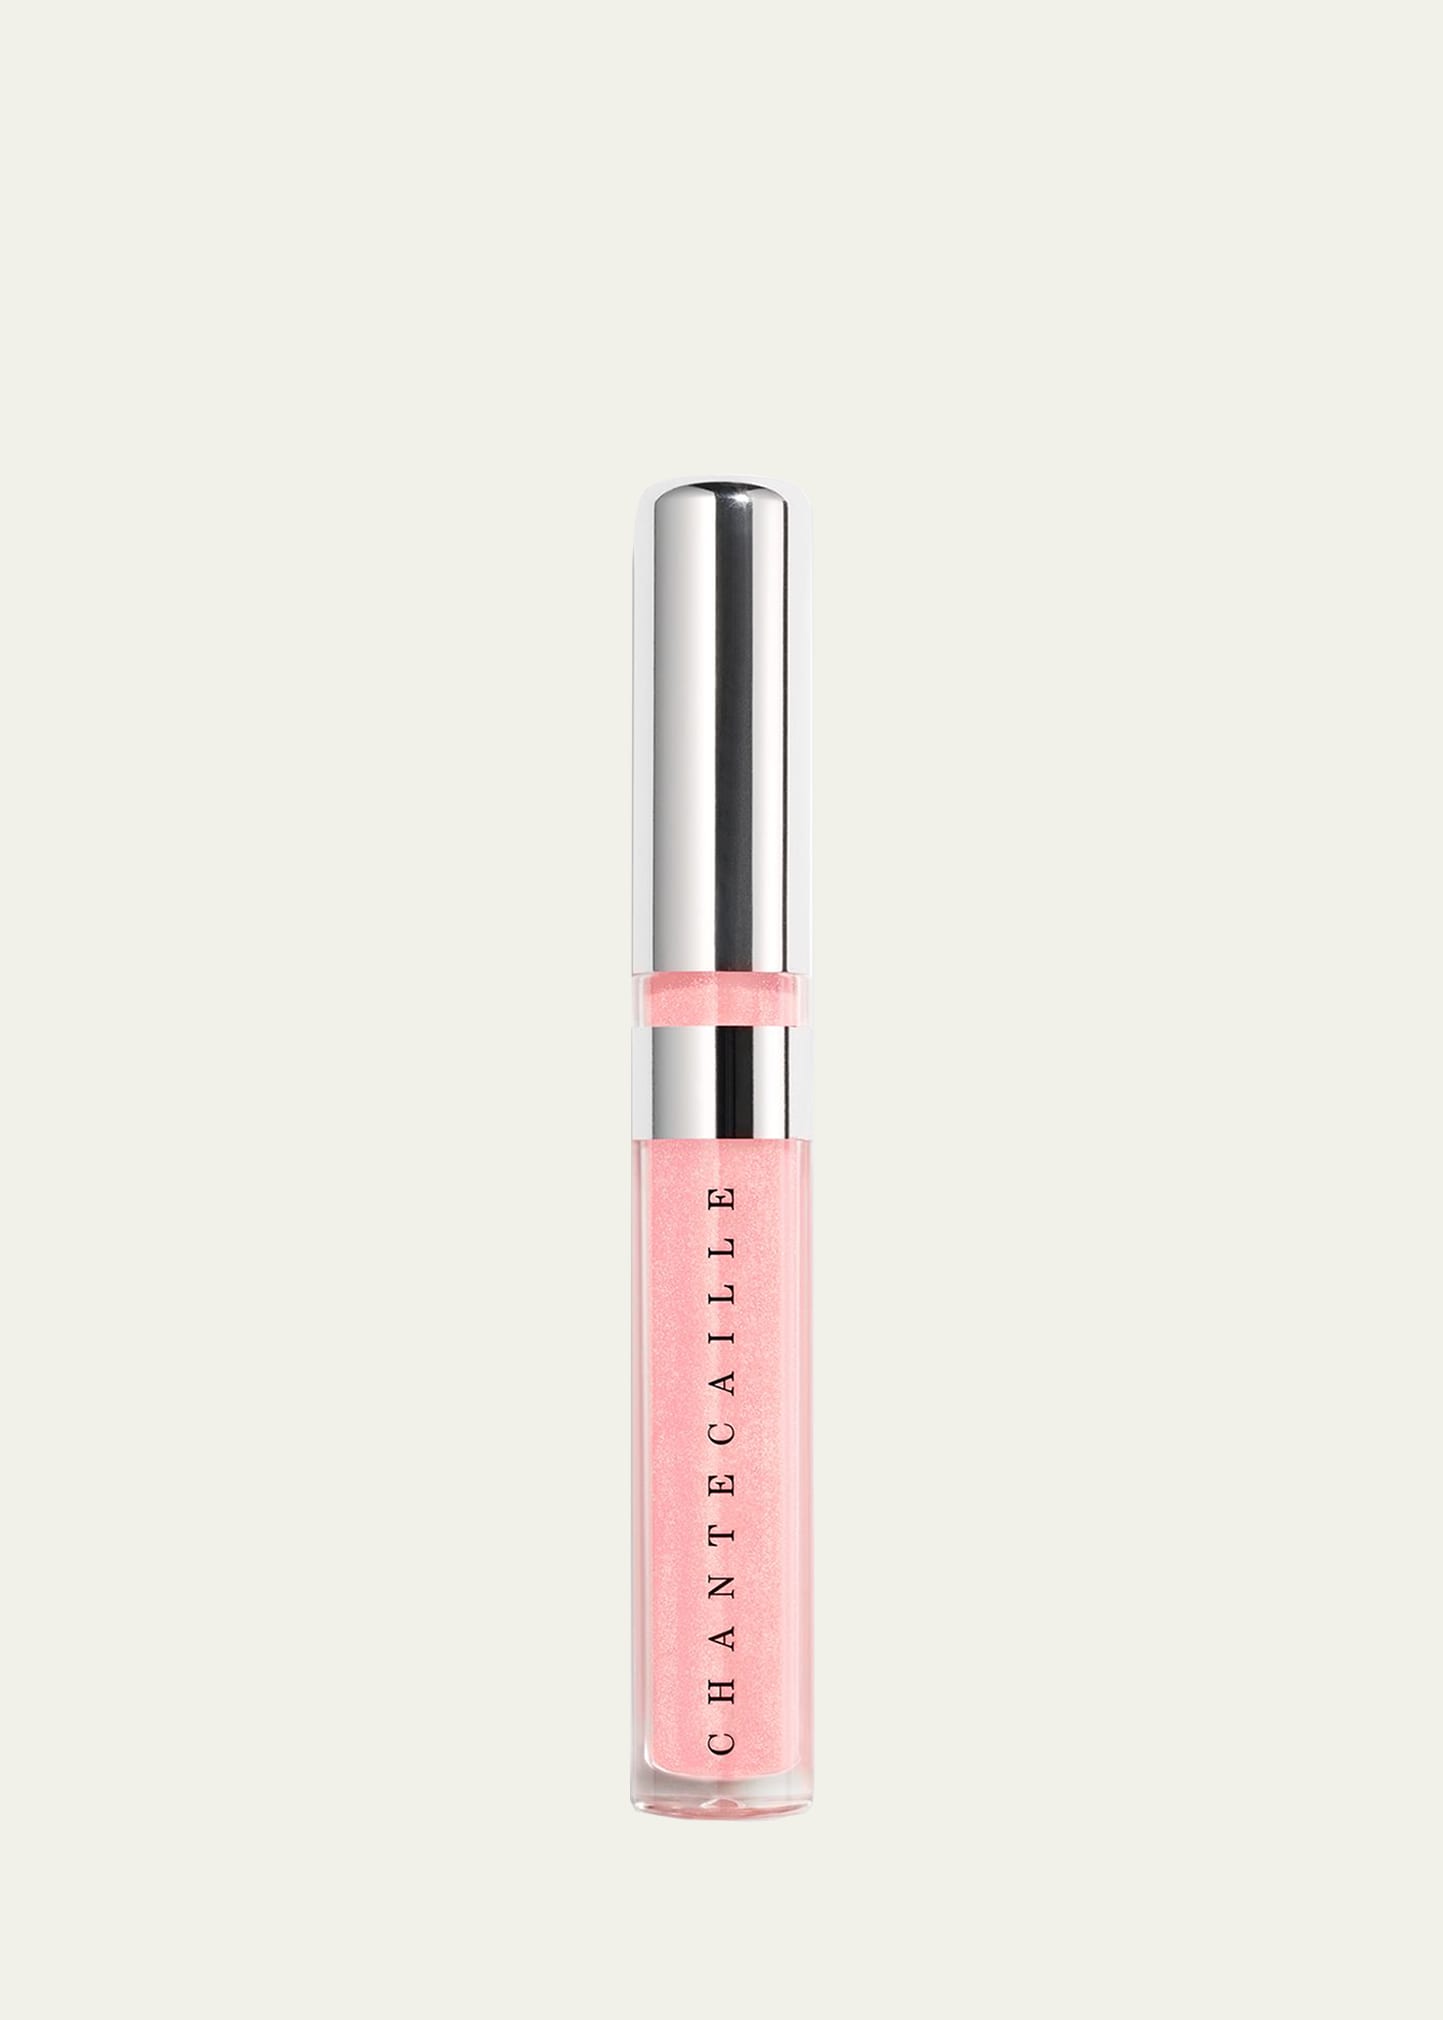 Chantecaille Brilliant Gloss In Blithe